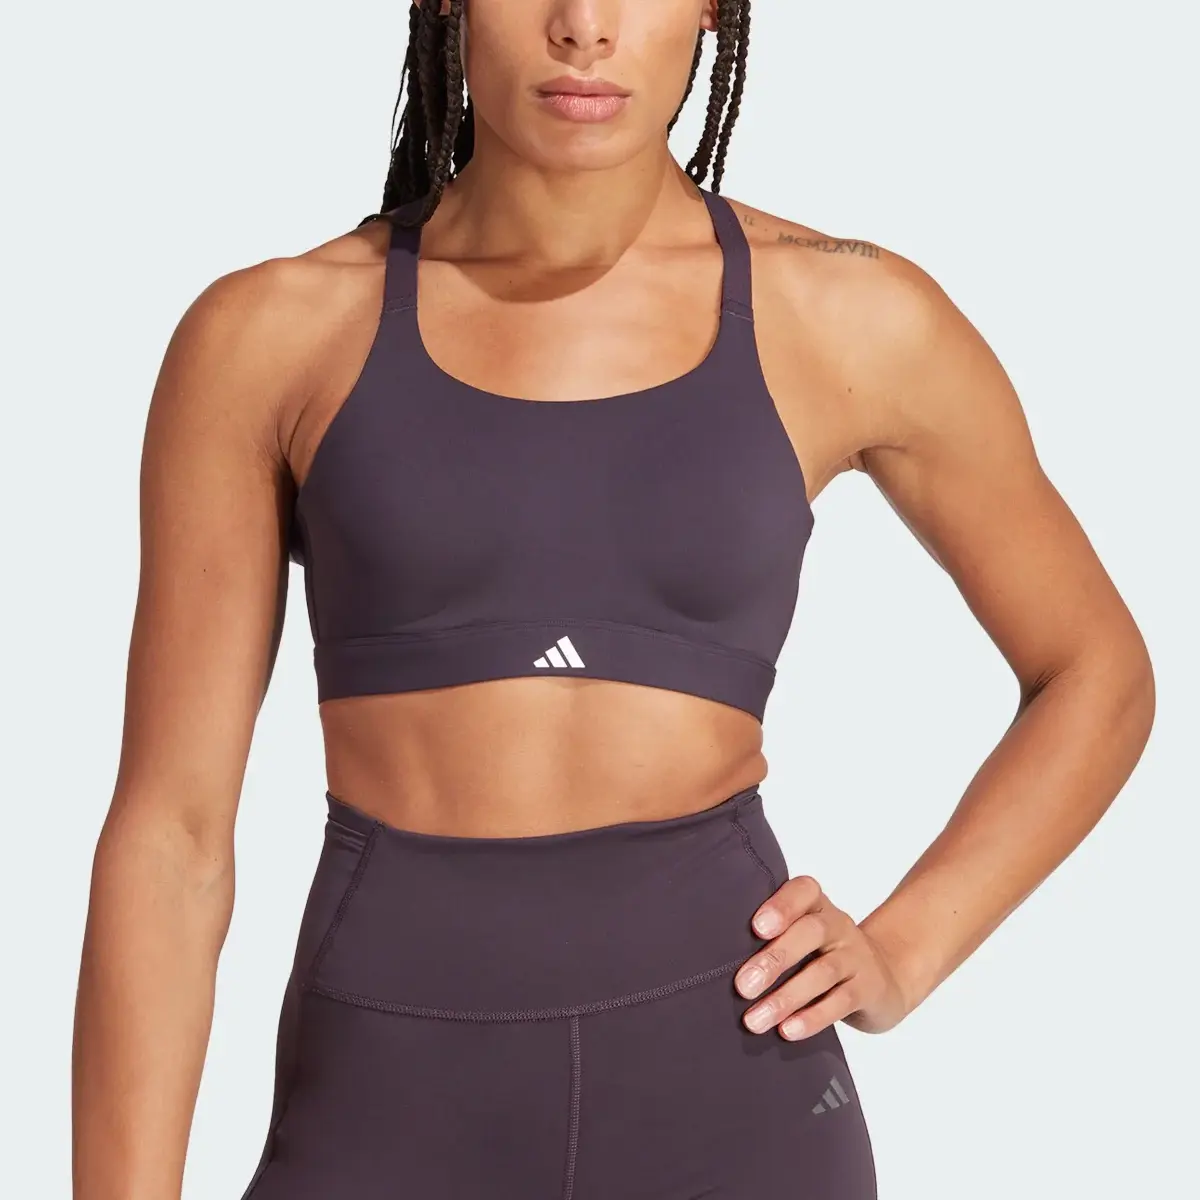 Adidas Brassière de training TLRD Impact Luxe Maintien fort. 1